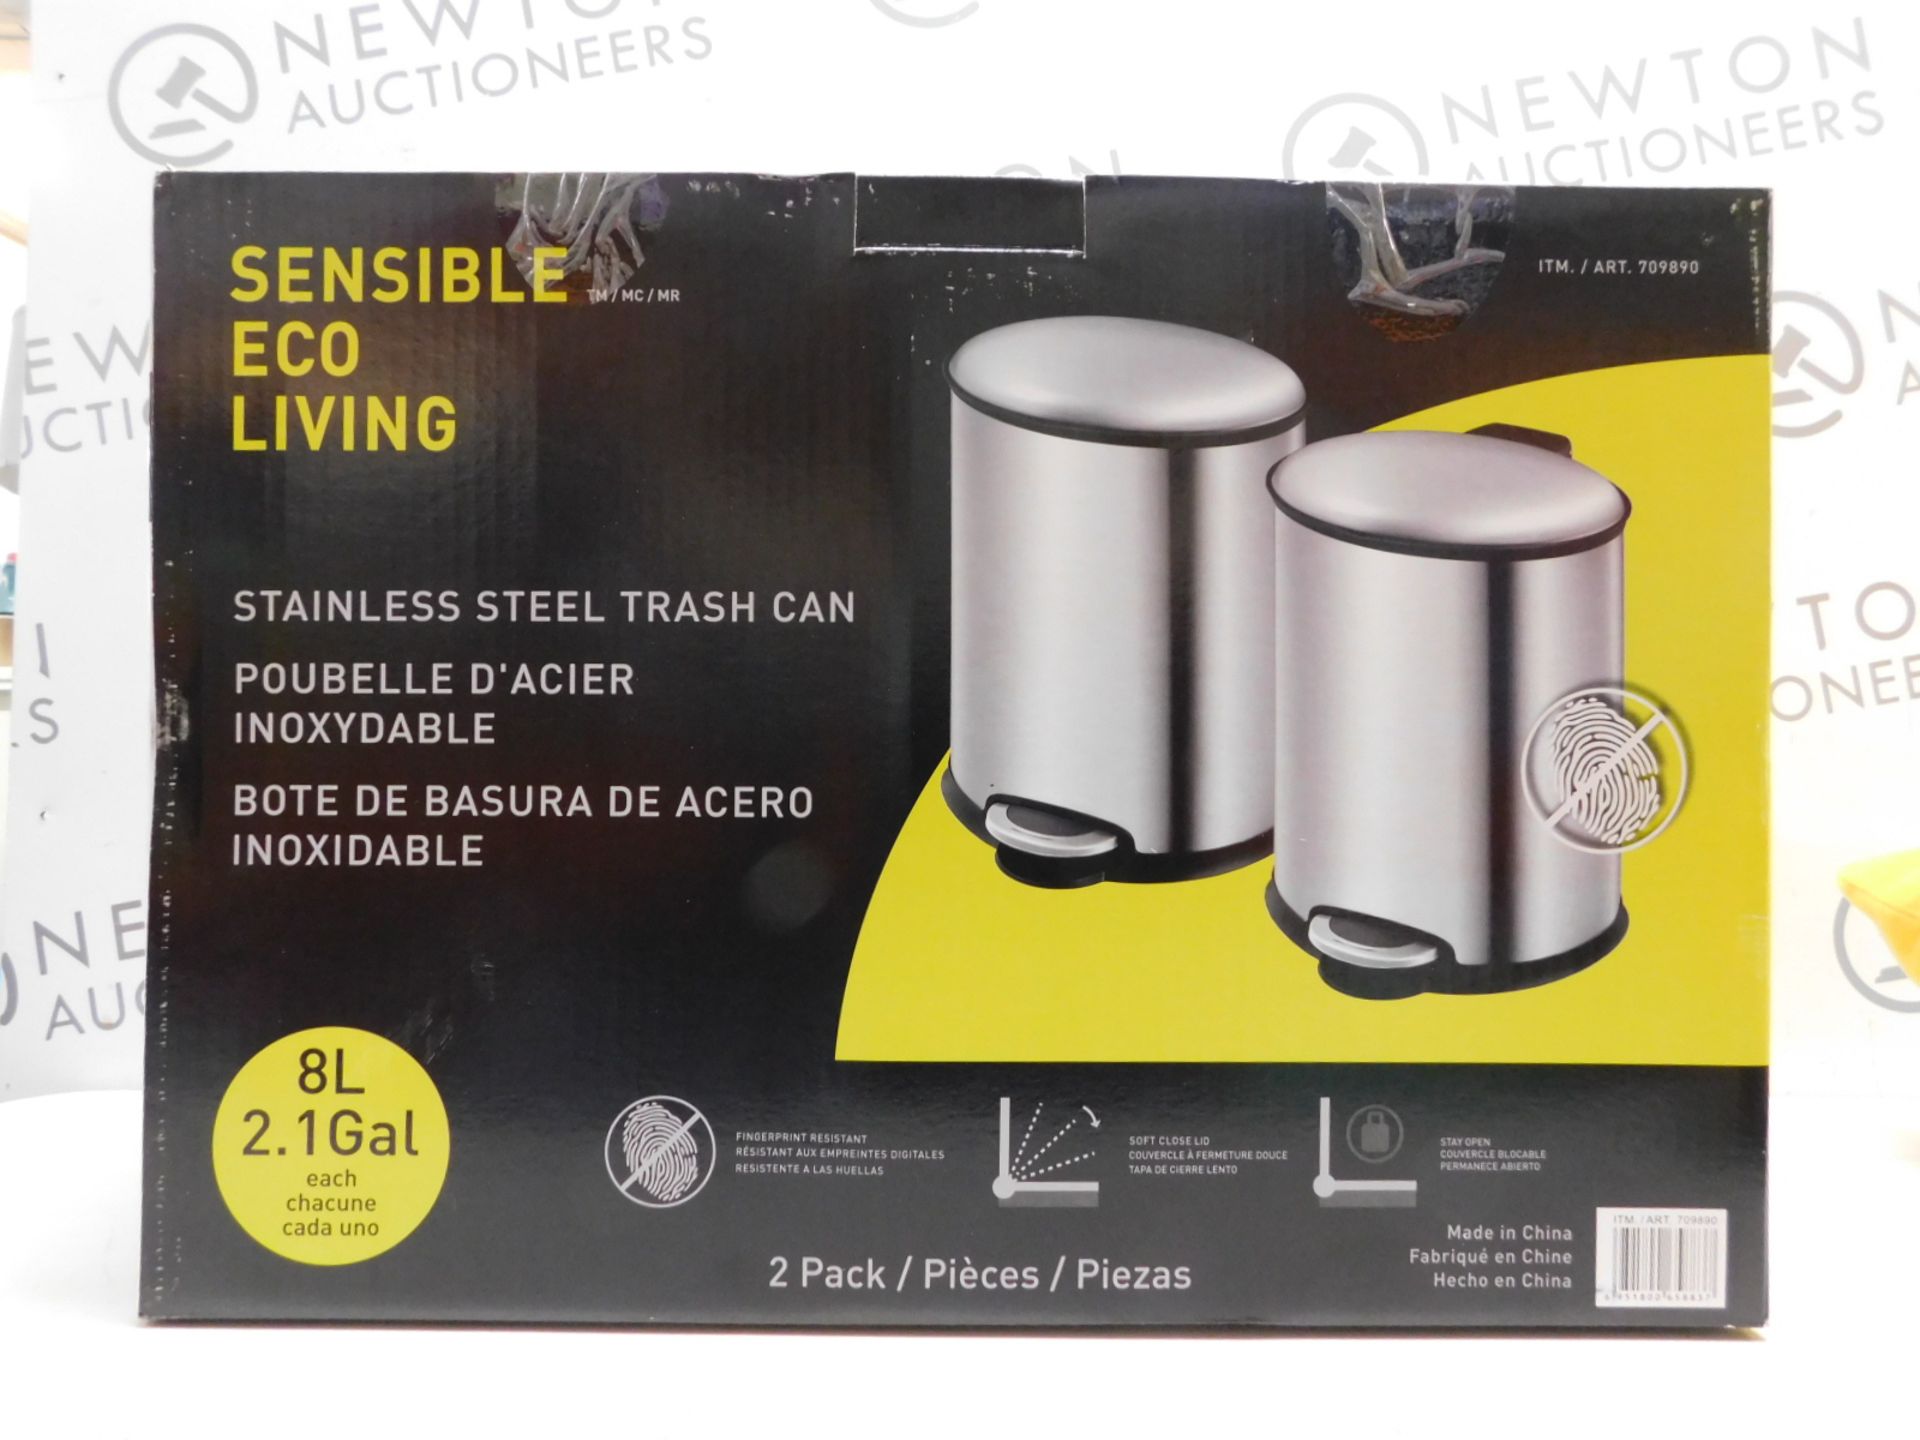 1 BOXED SENSIBLE ECO LIVING STAINLESS STEEL PEDAL BIN RRP £24.99